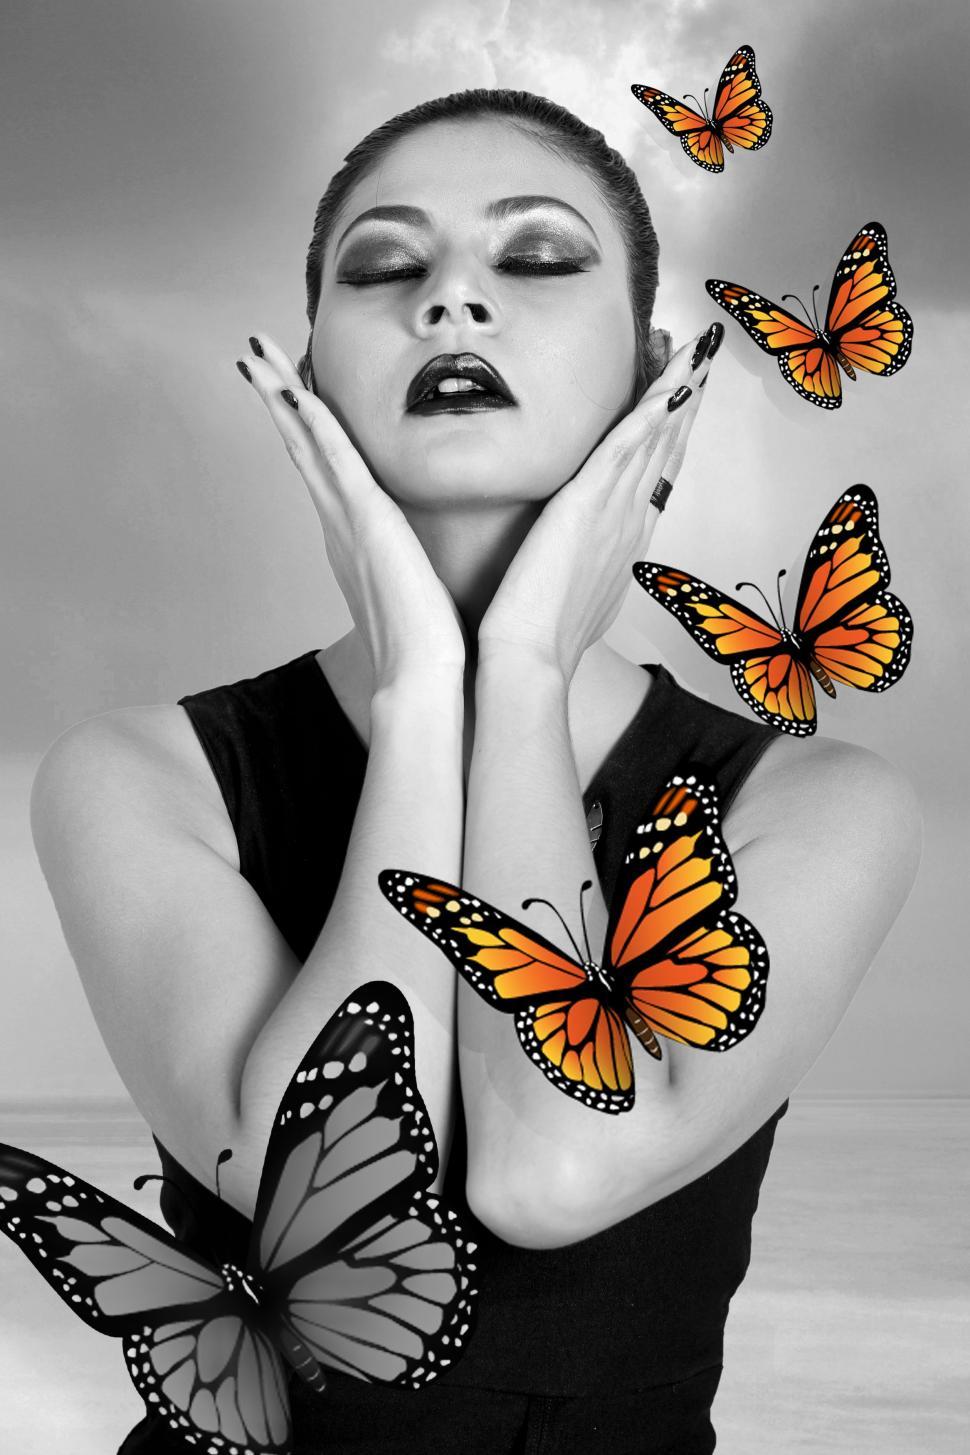 Free Image of Computer Graphics - Woman and Butterflies 